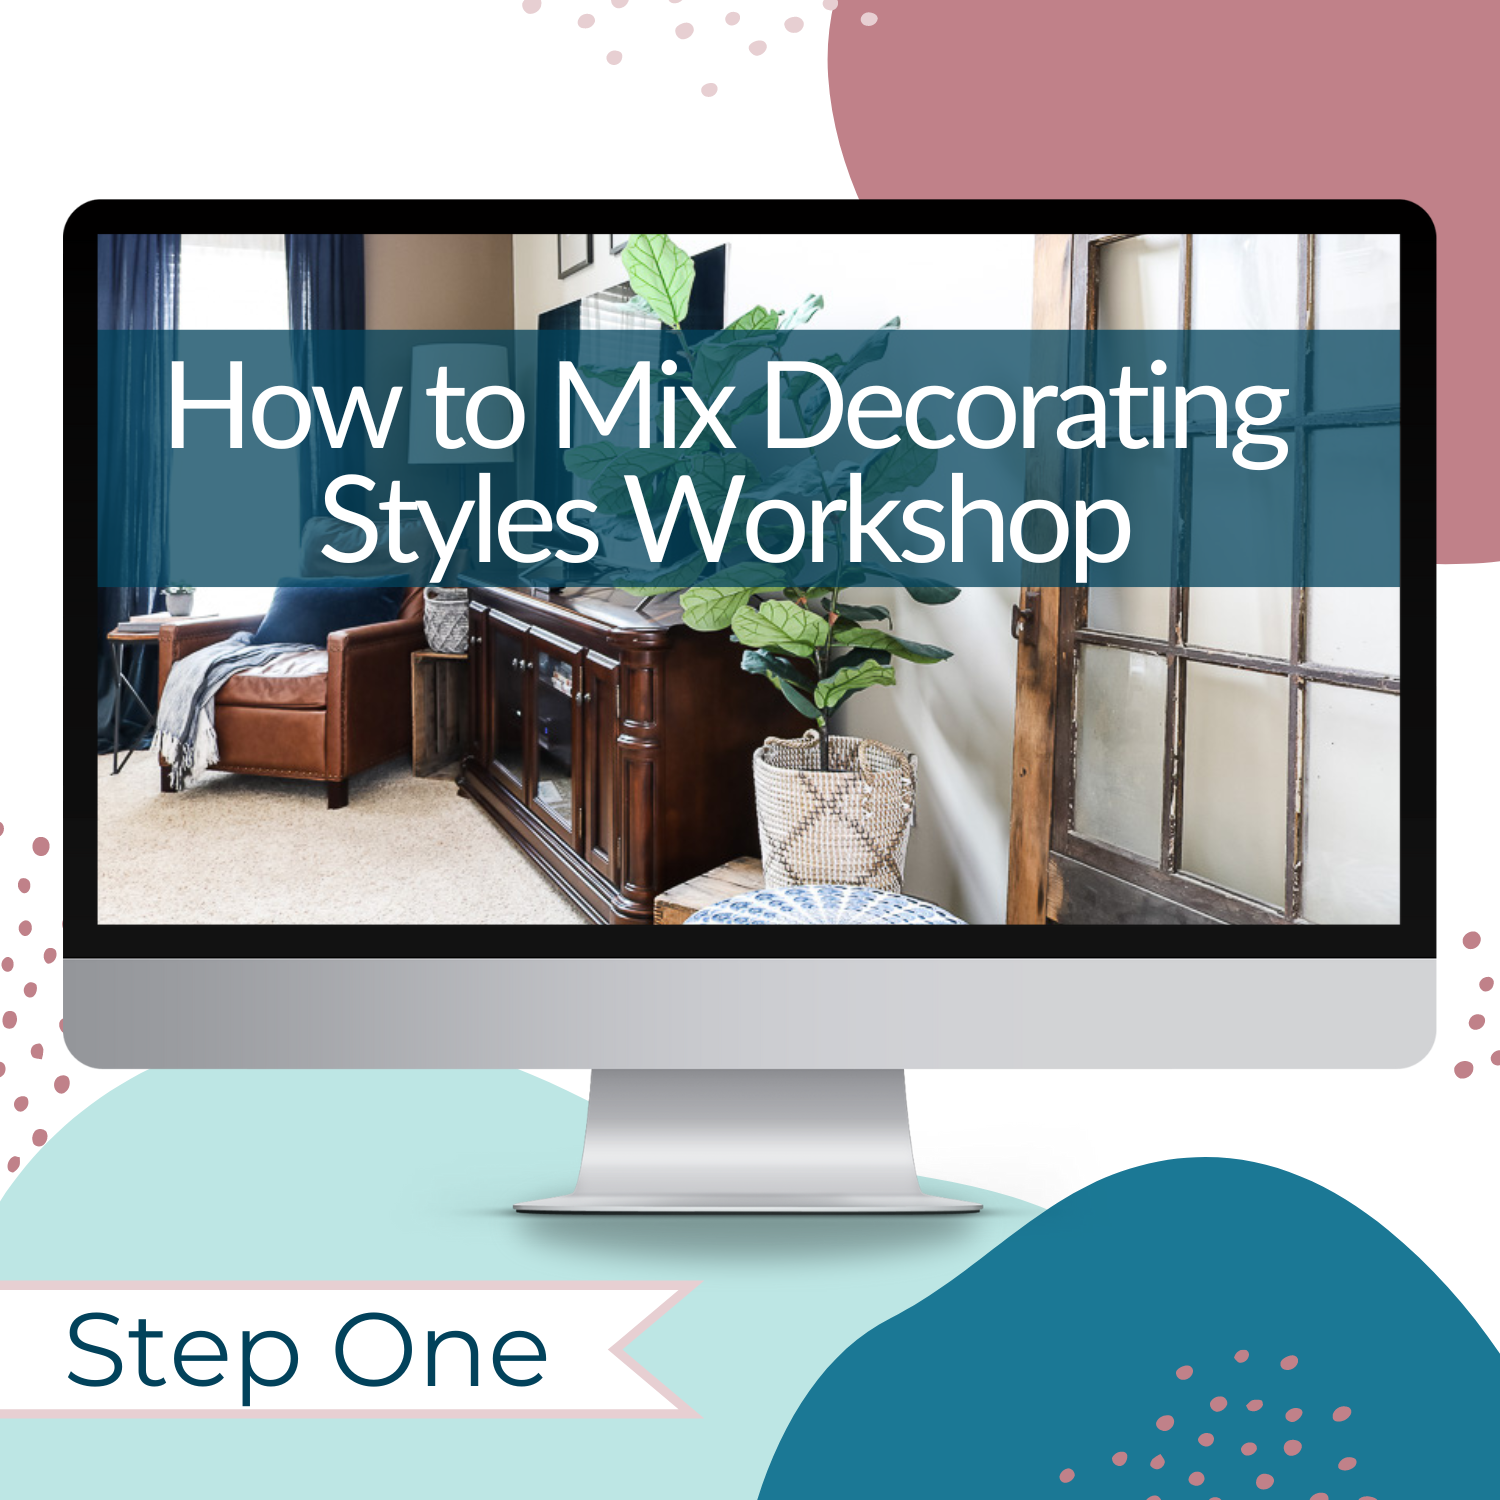 My Homier Home presents the &quot;How to Mix Decorating Styles for a Cohesive Look Workshop&quot; for mastering style preferences and achieving cohesiveness in mix-and-match décor.